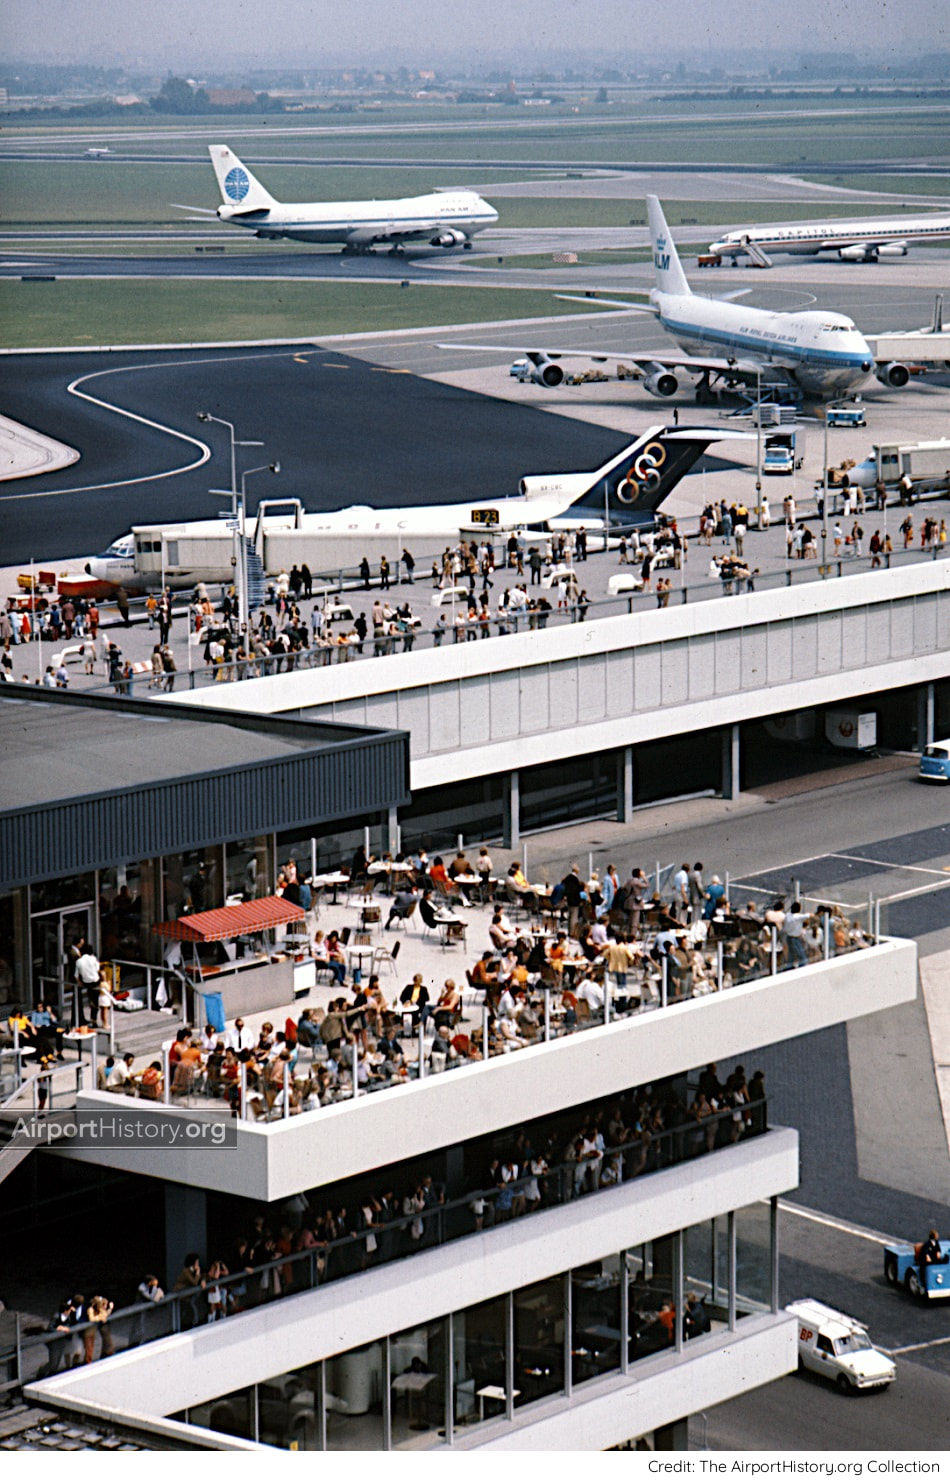 Amsterdam Schiphol Airport's Panorama Terrace in the 1970s.